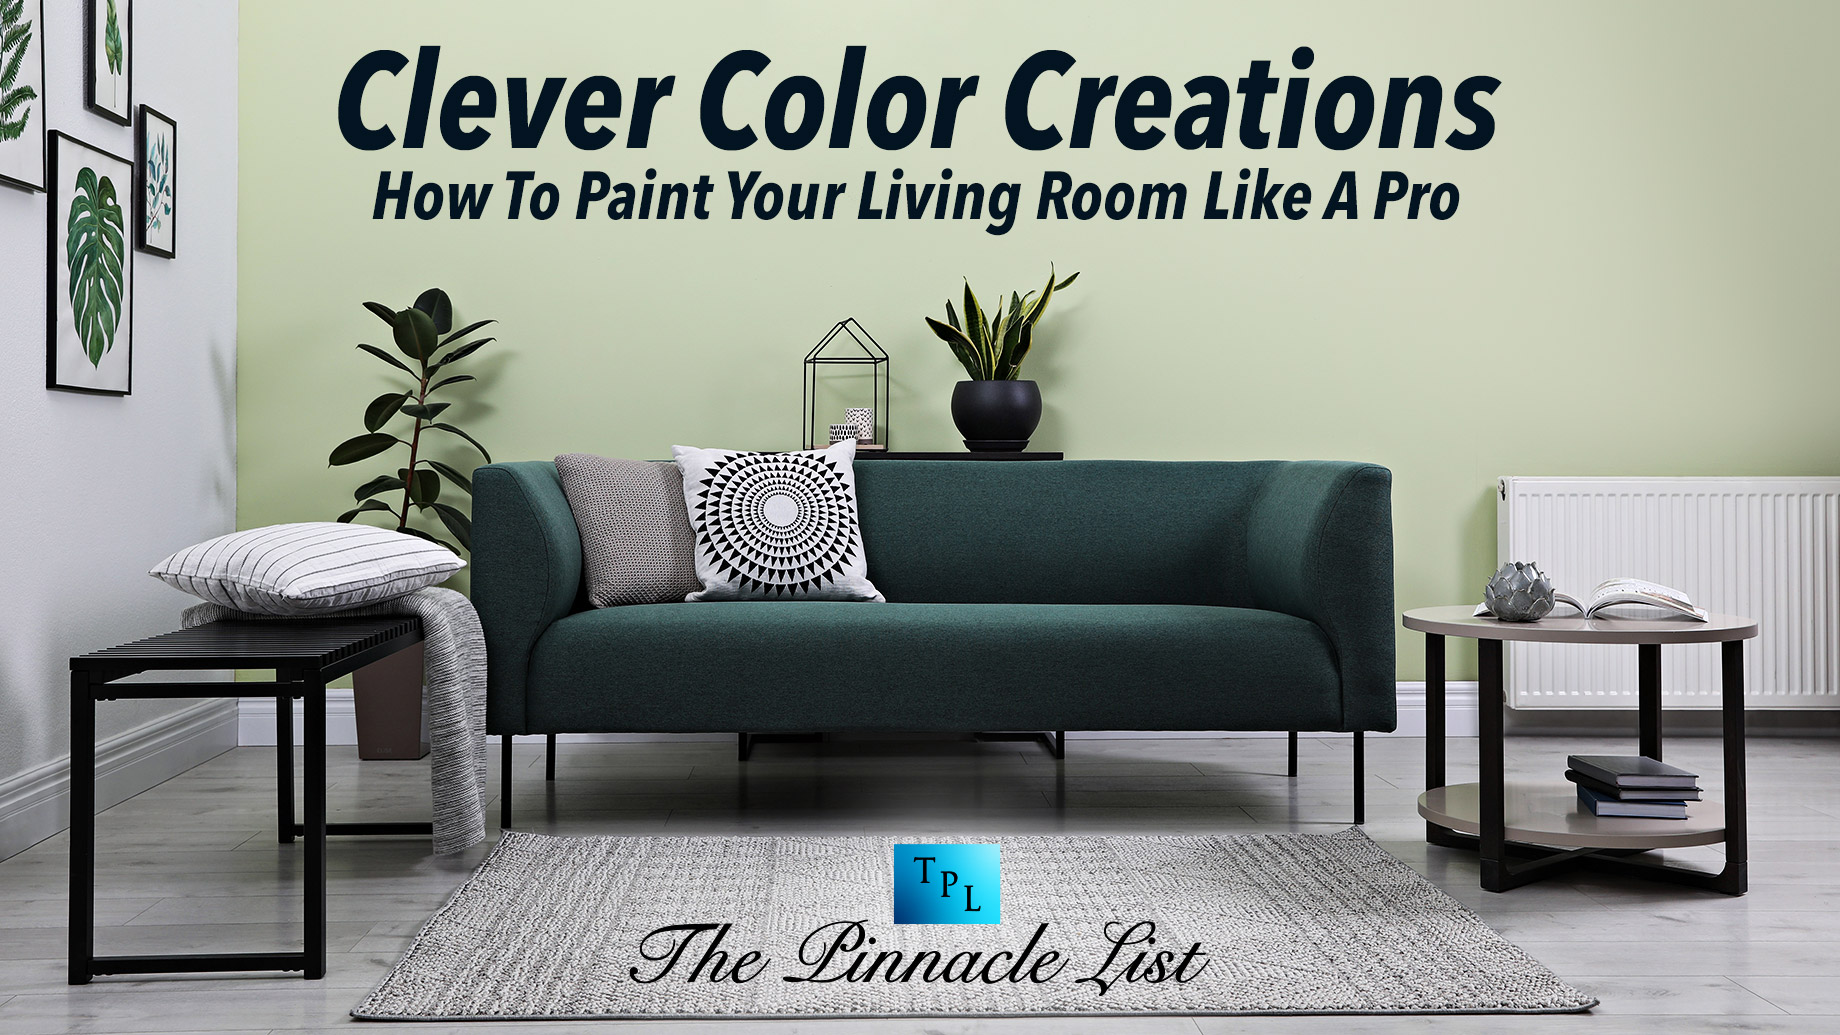 Clever Color Creations: How To Paint Your Living Room Like A Pro